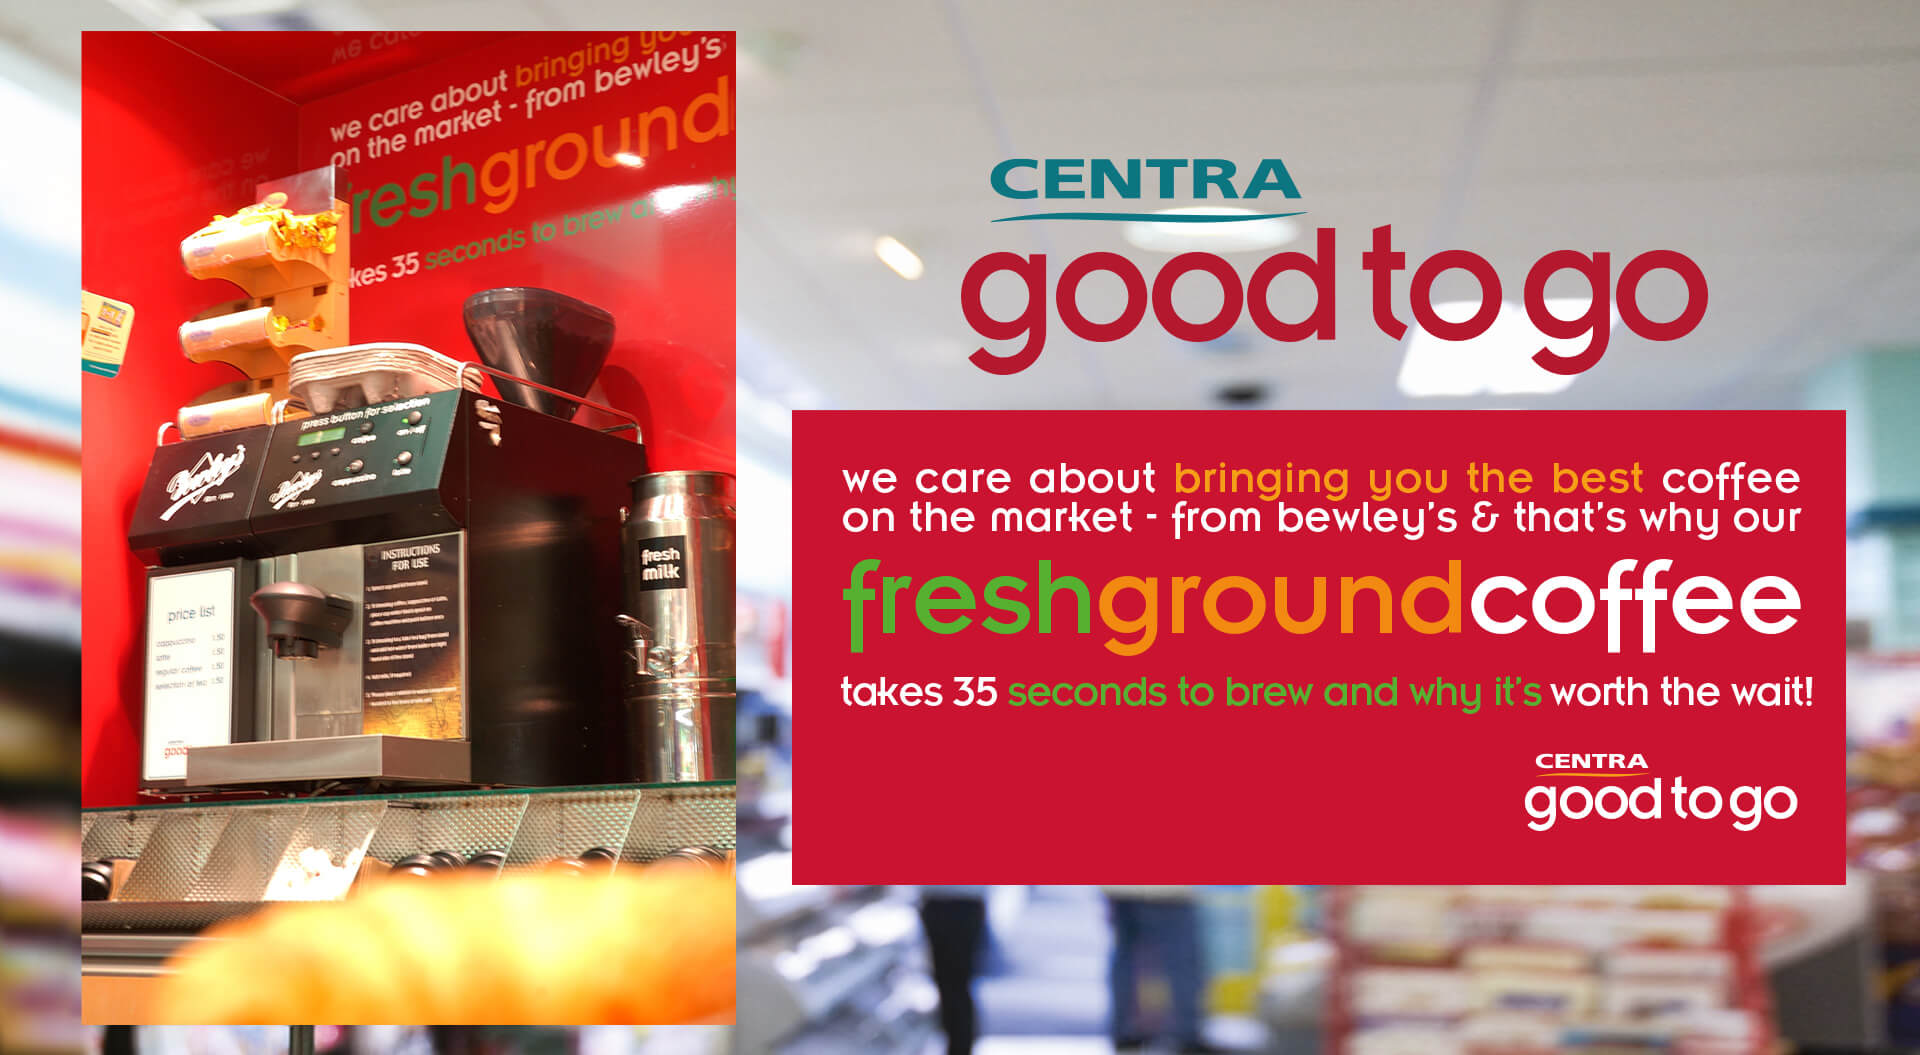 Centra convenience stores good to go typographic styling for fresh ground coffee dispenser